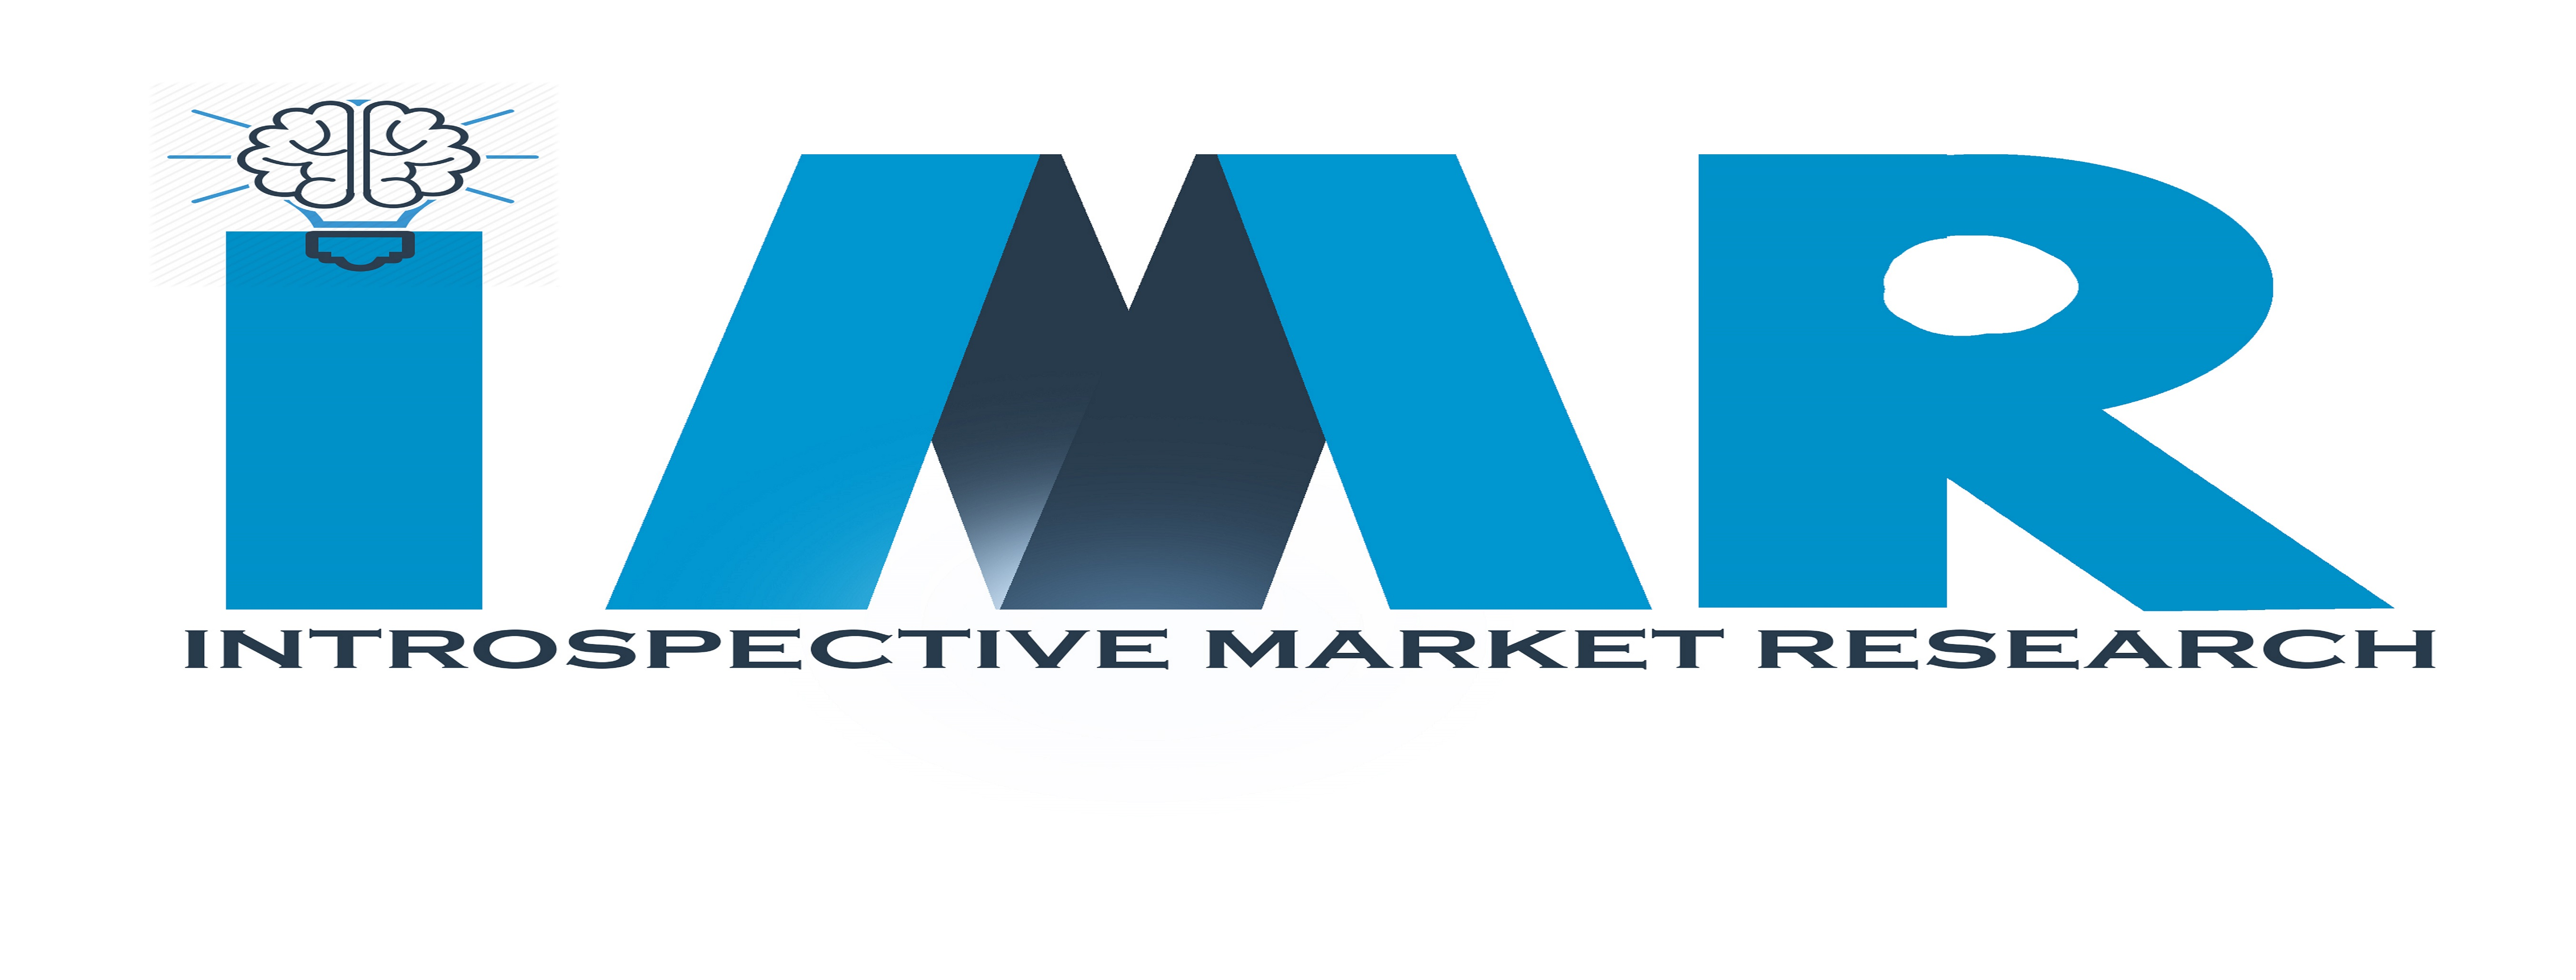 Company Logo For Introspective Market Research'